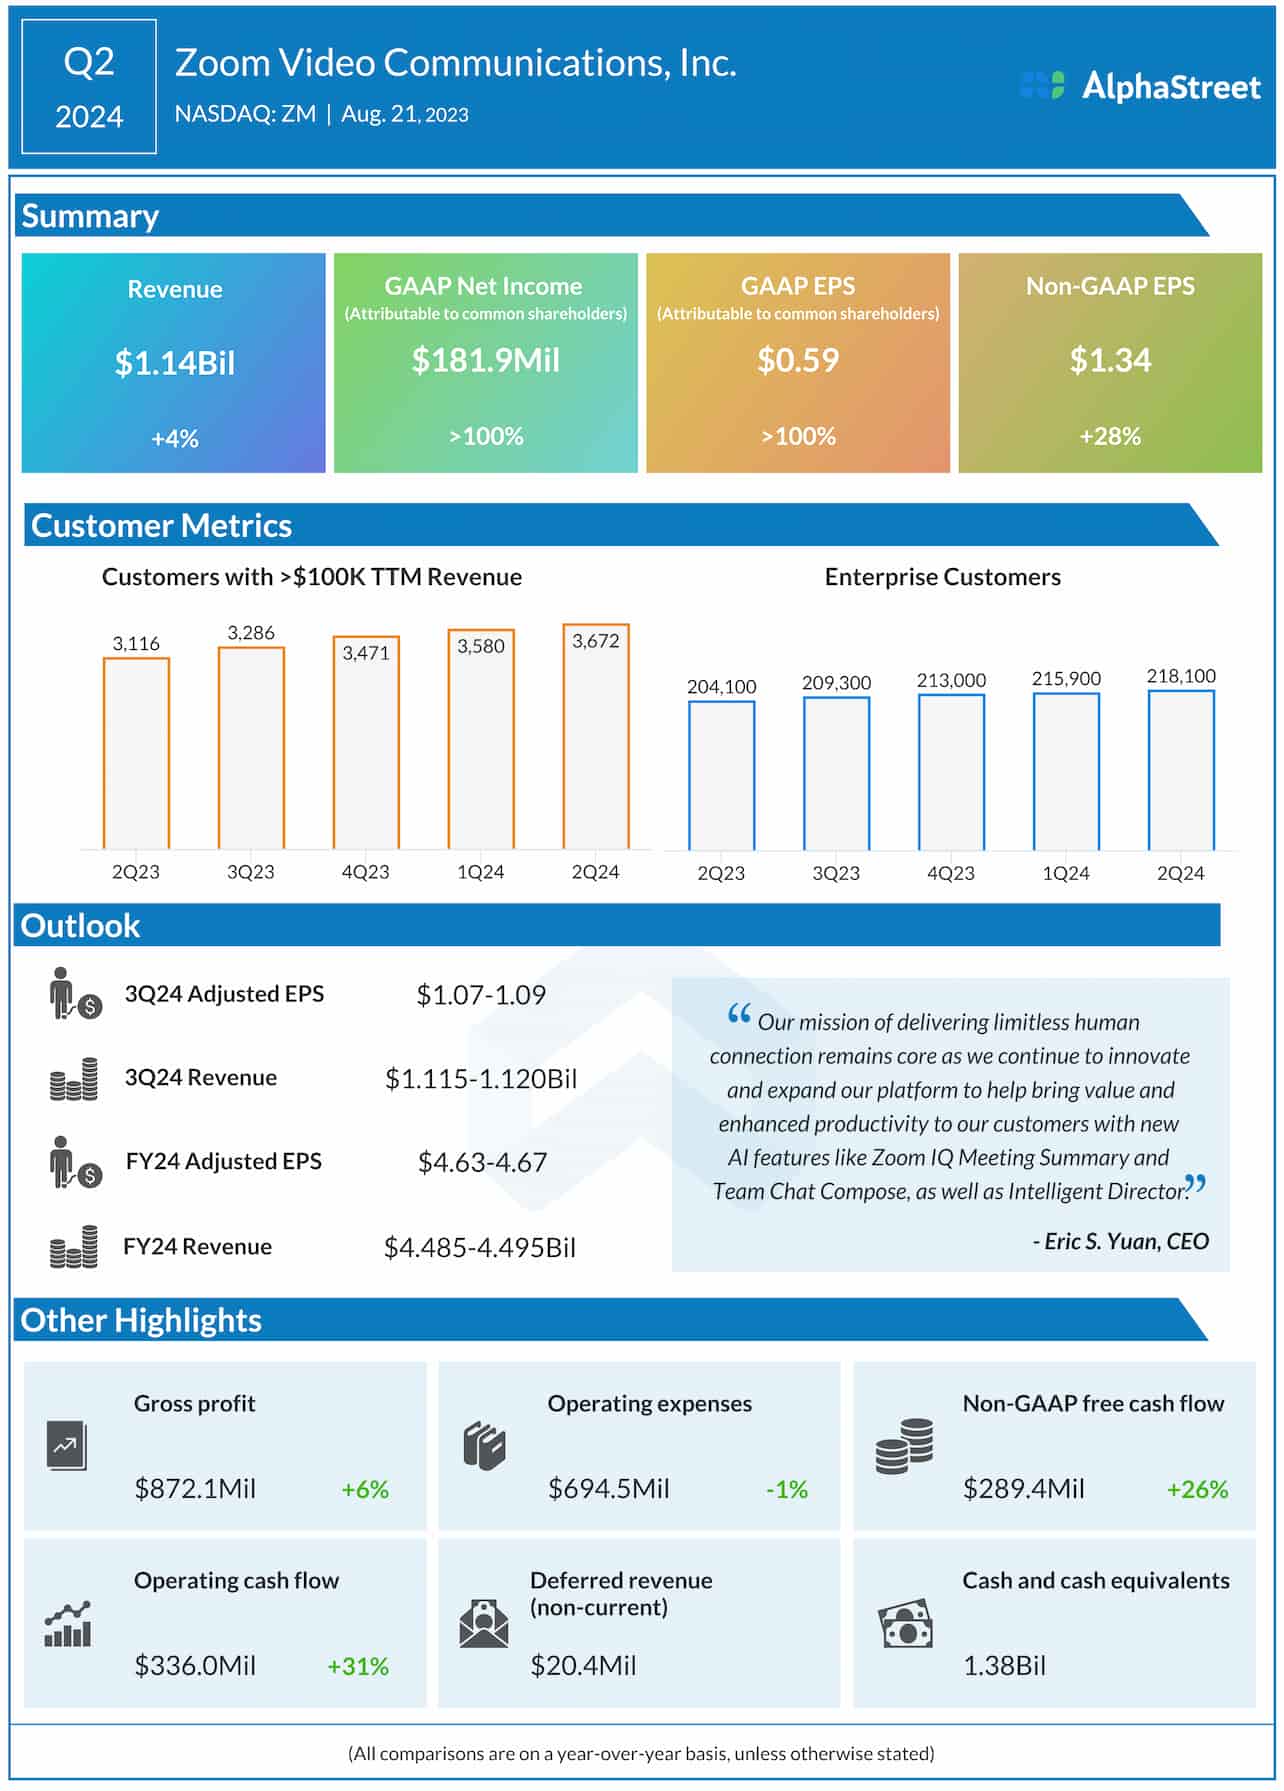 Zoom Video Communications Q2 2024 earnings infographic